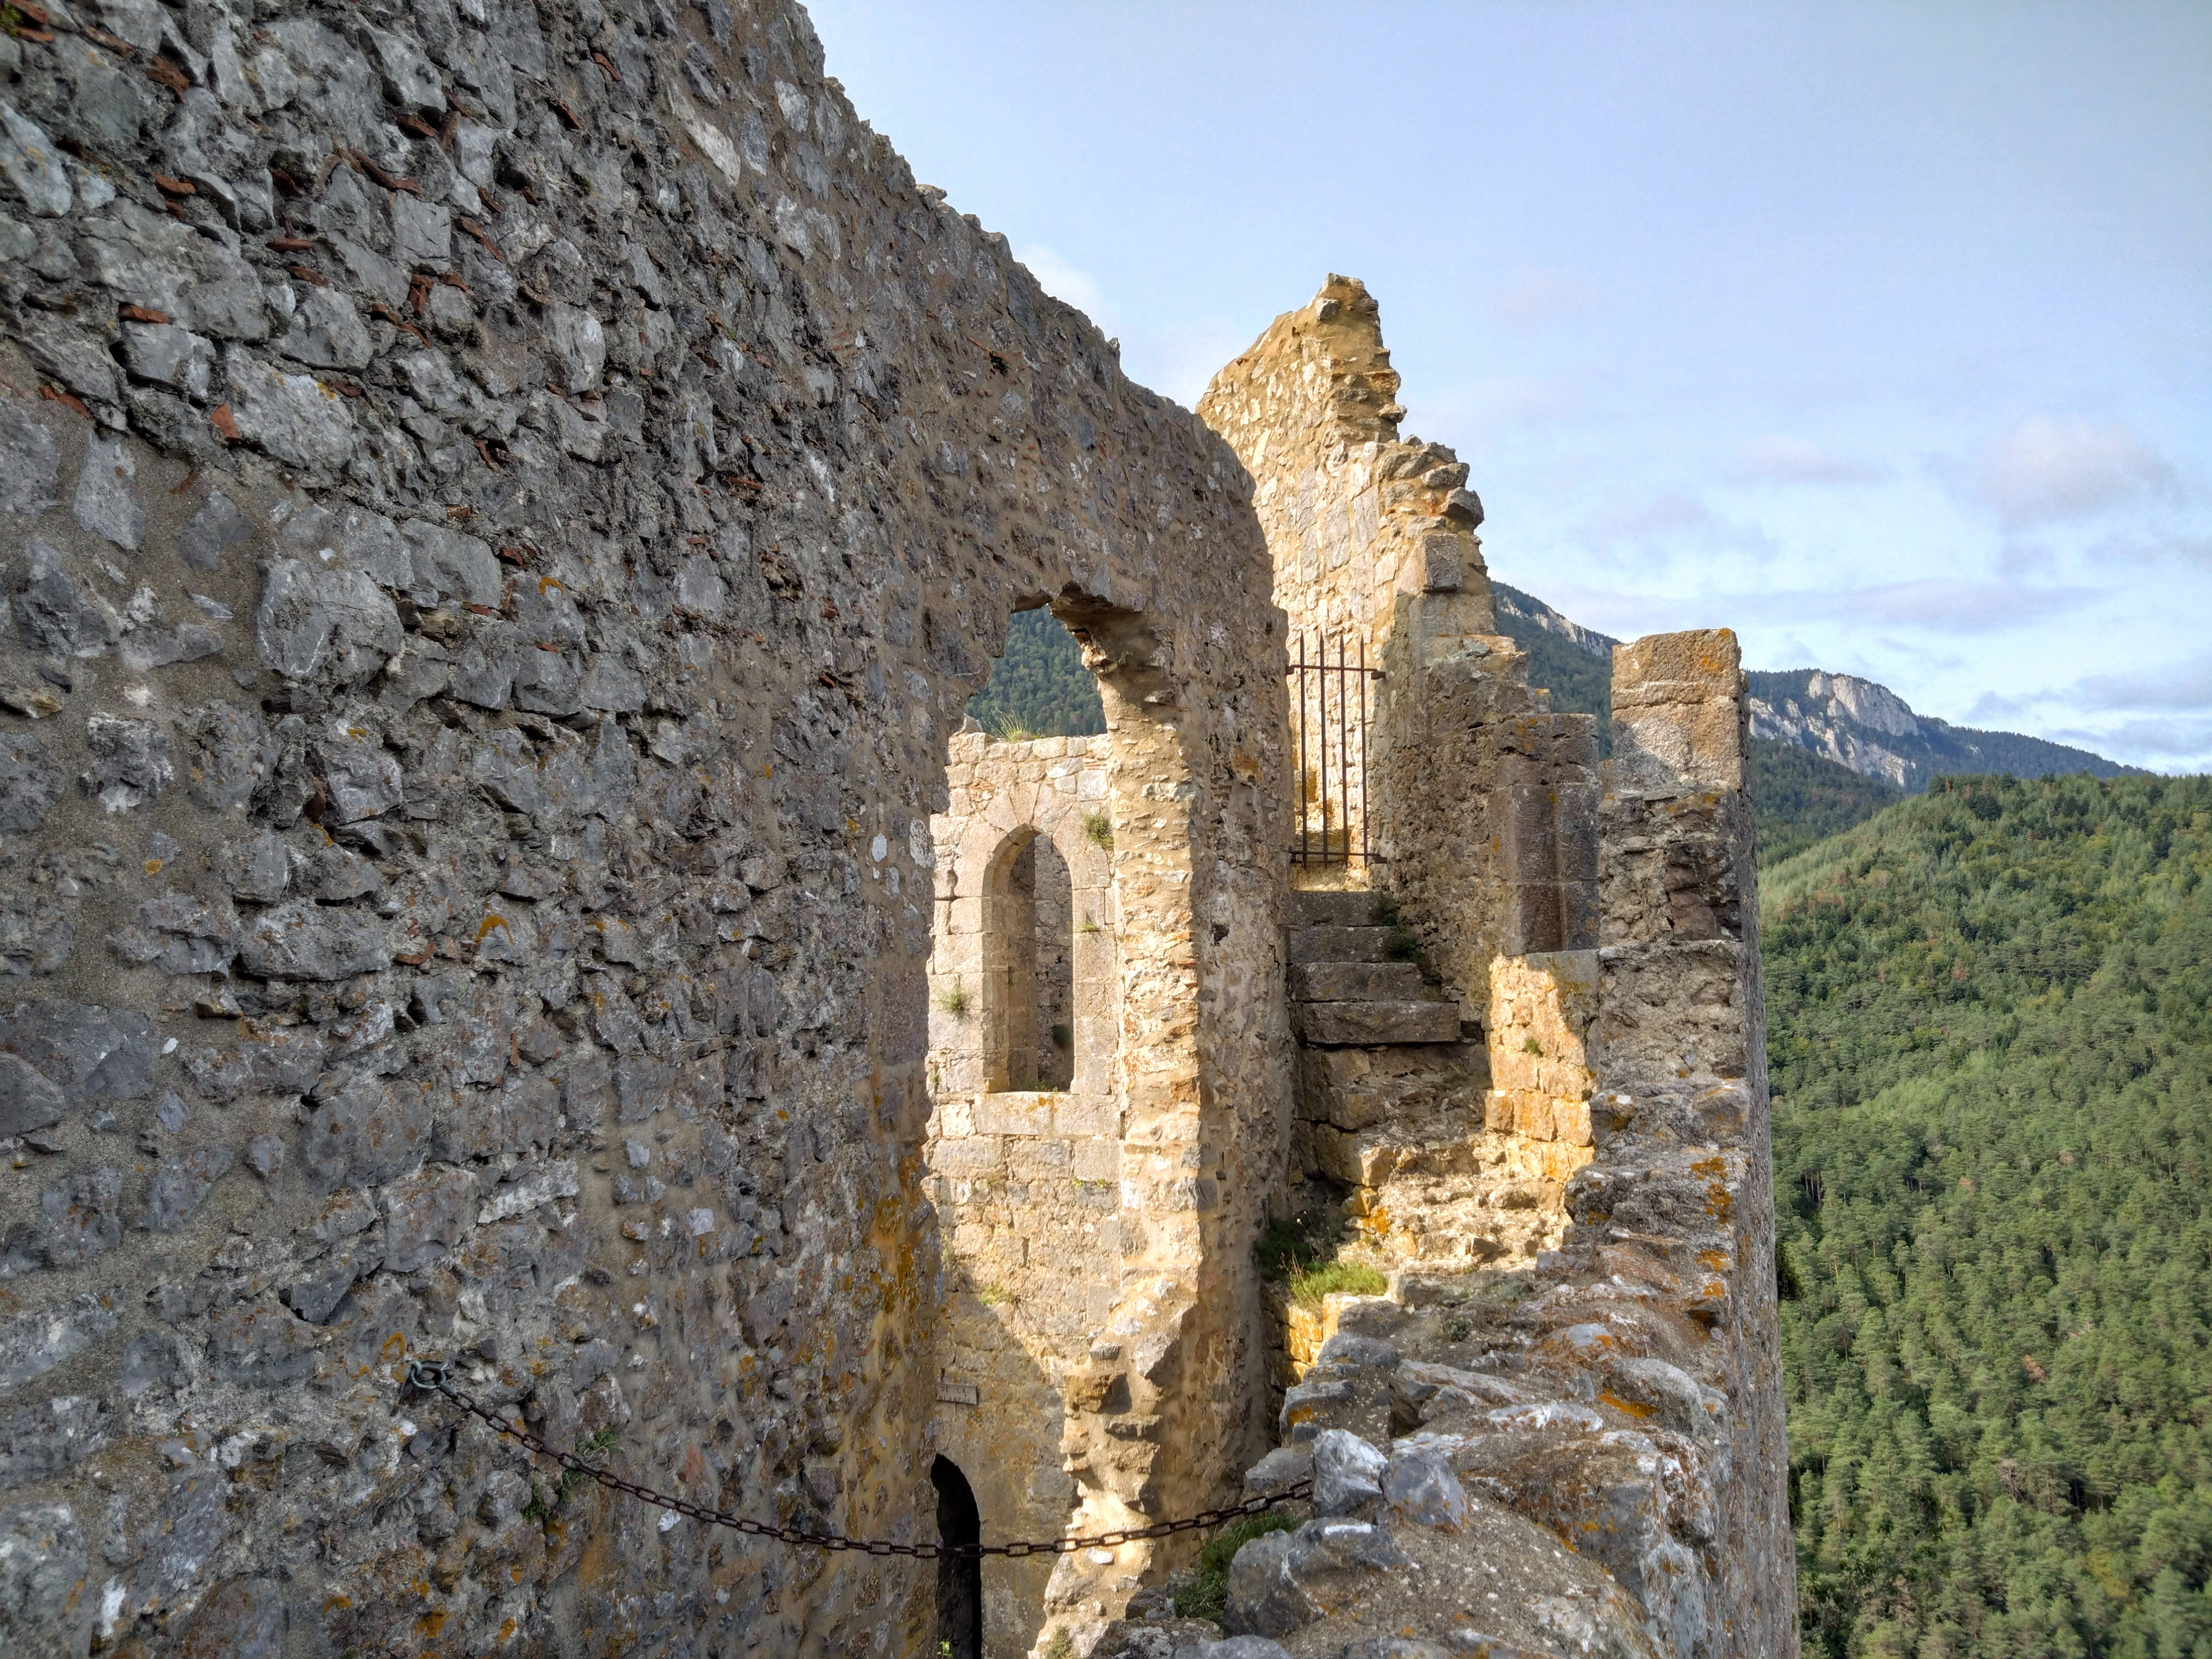 A stay in Cathar country and its major listed sites